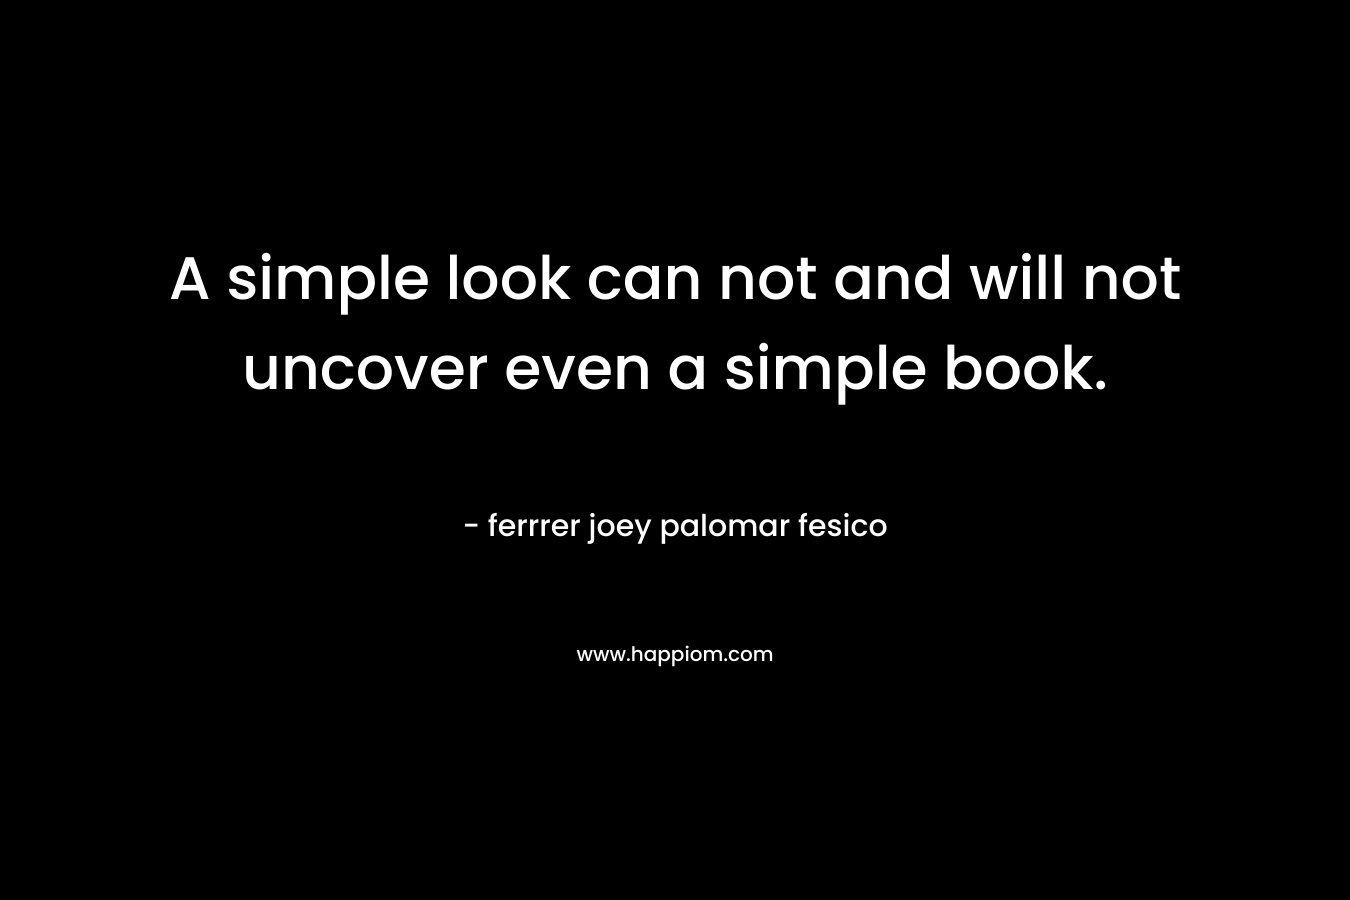 A simple look can not and will not uncover even a simple book.